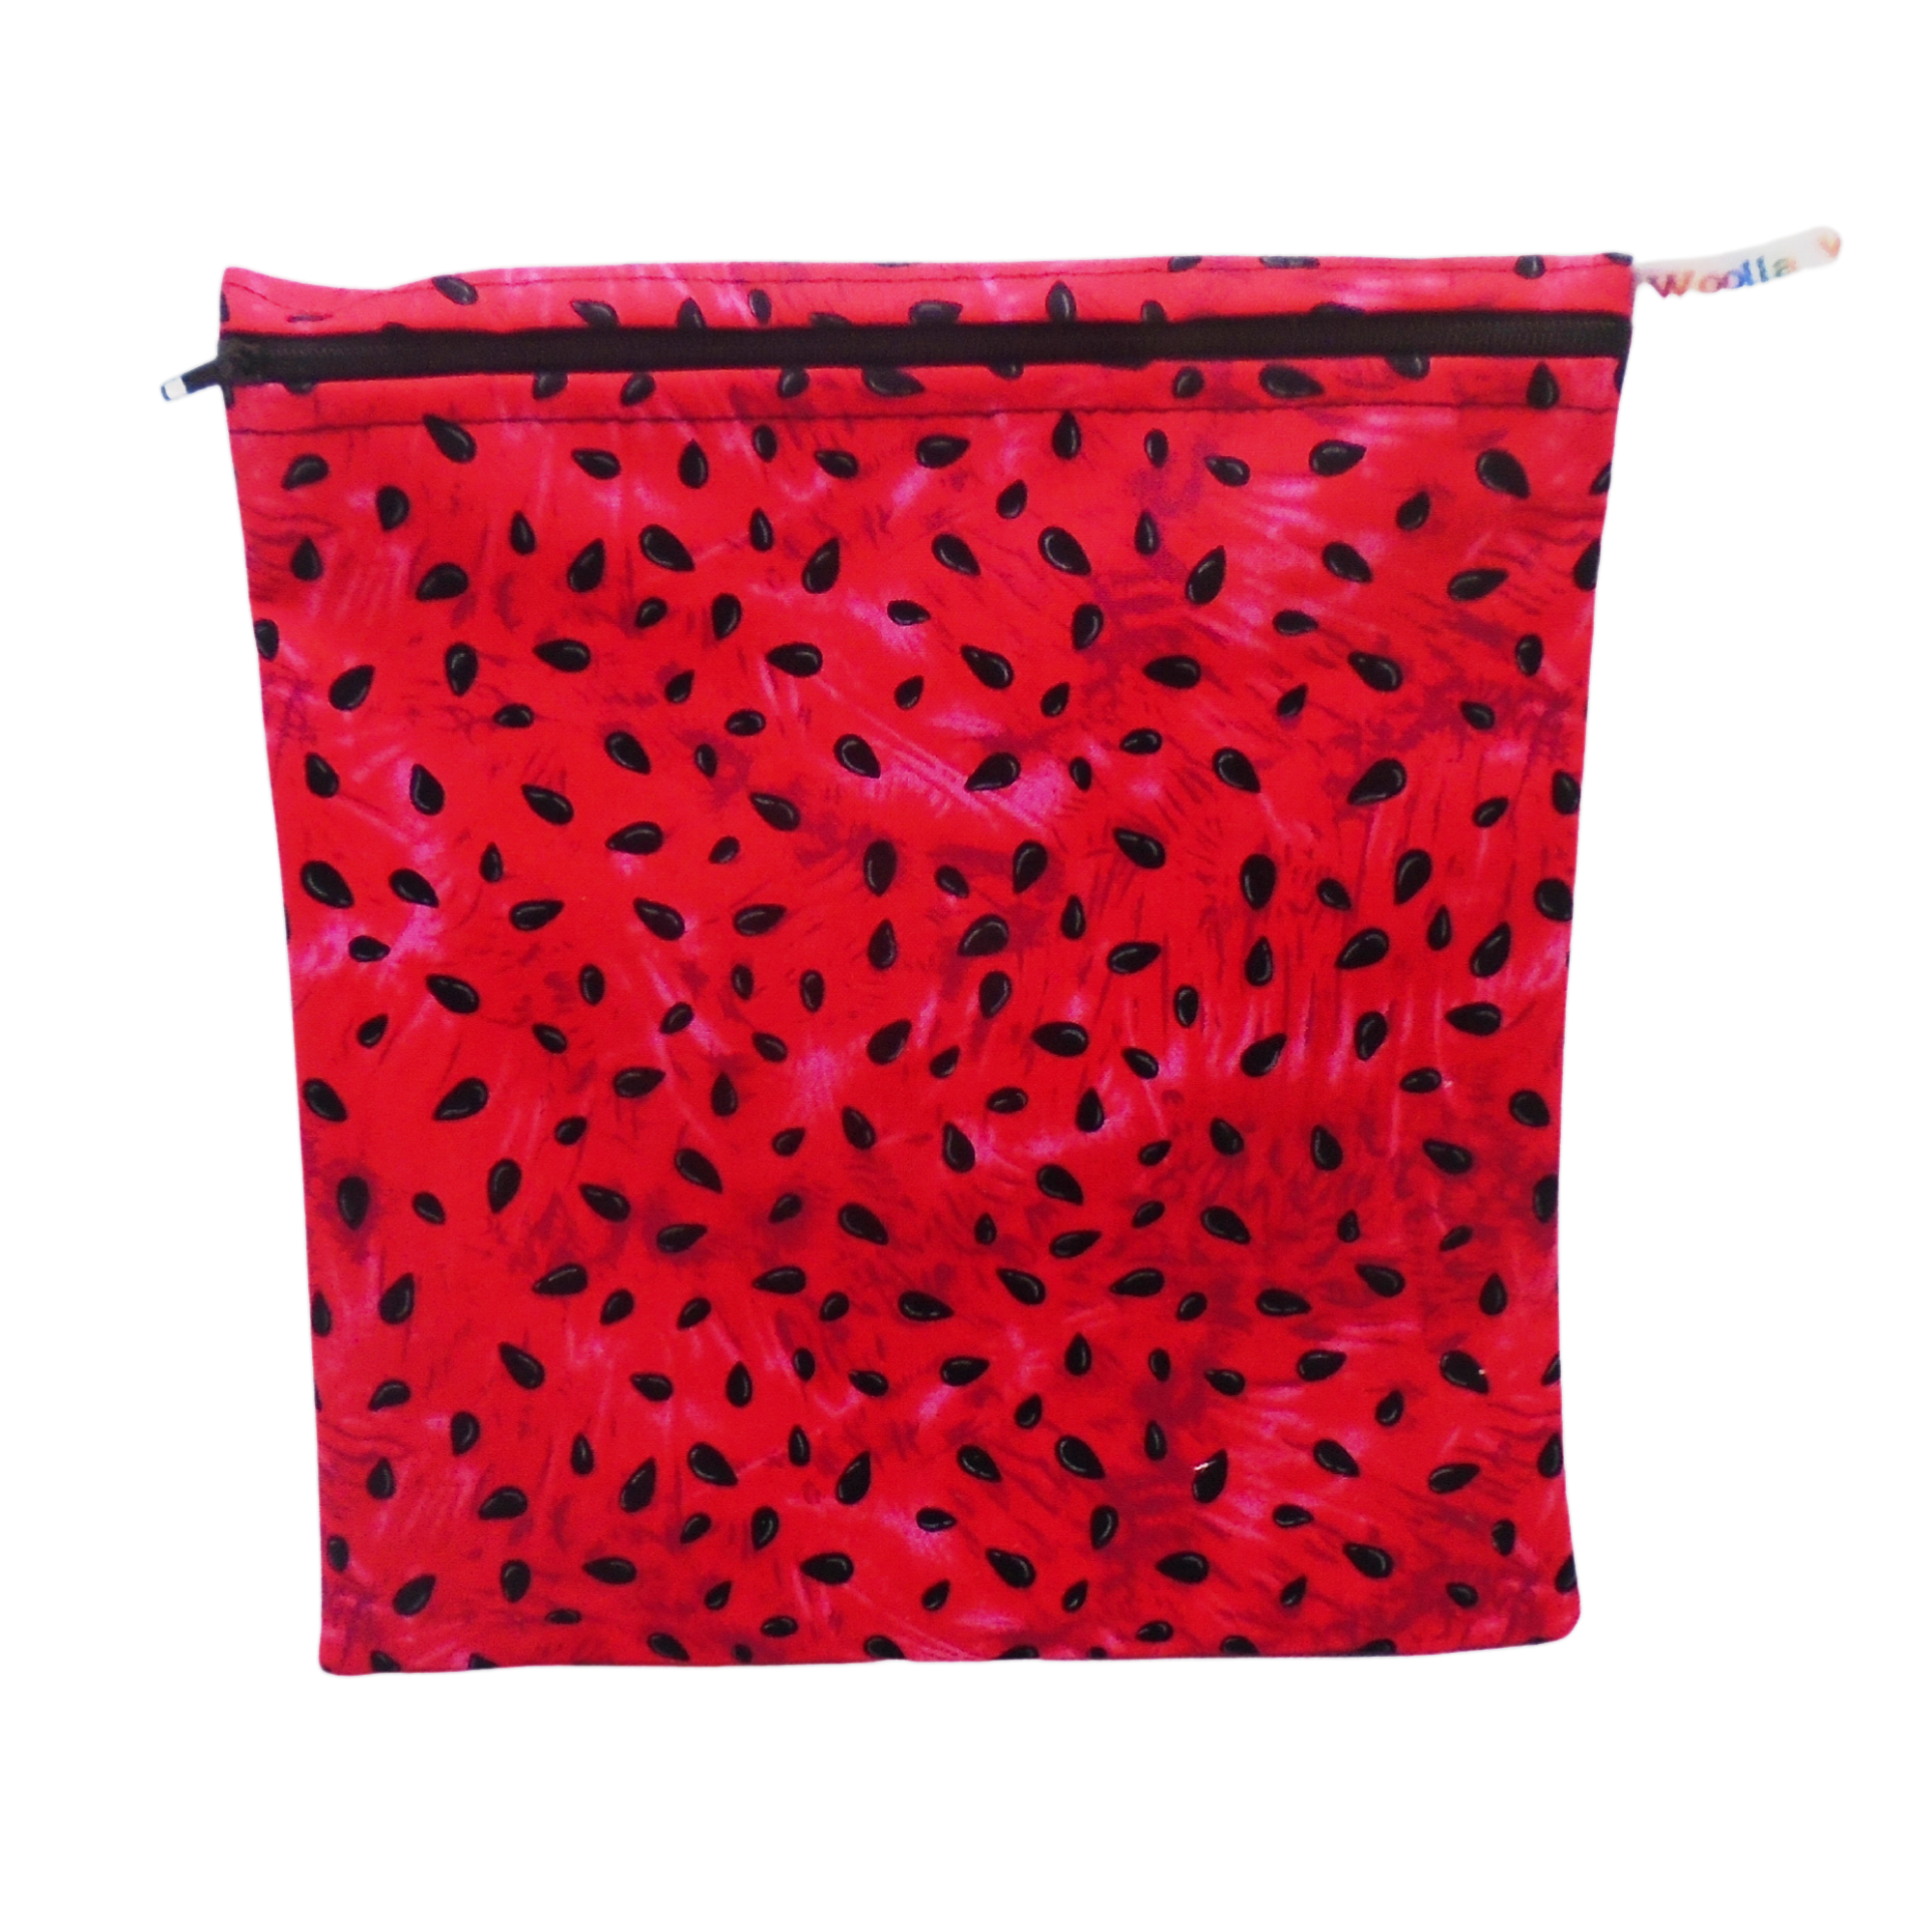 Watermelon Pips - Large Poppins Pouch - Waterproof, Washable, Food Safe, Vegan, Lined Zip Bag